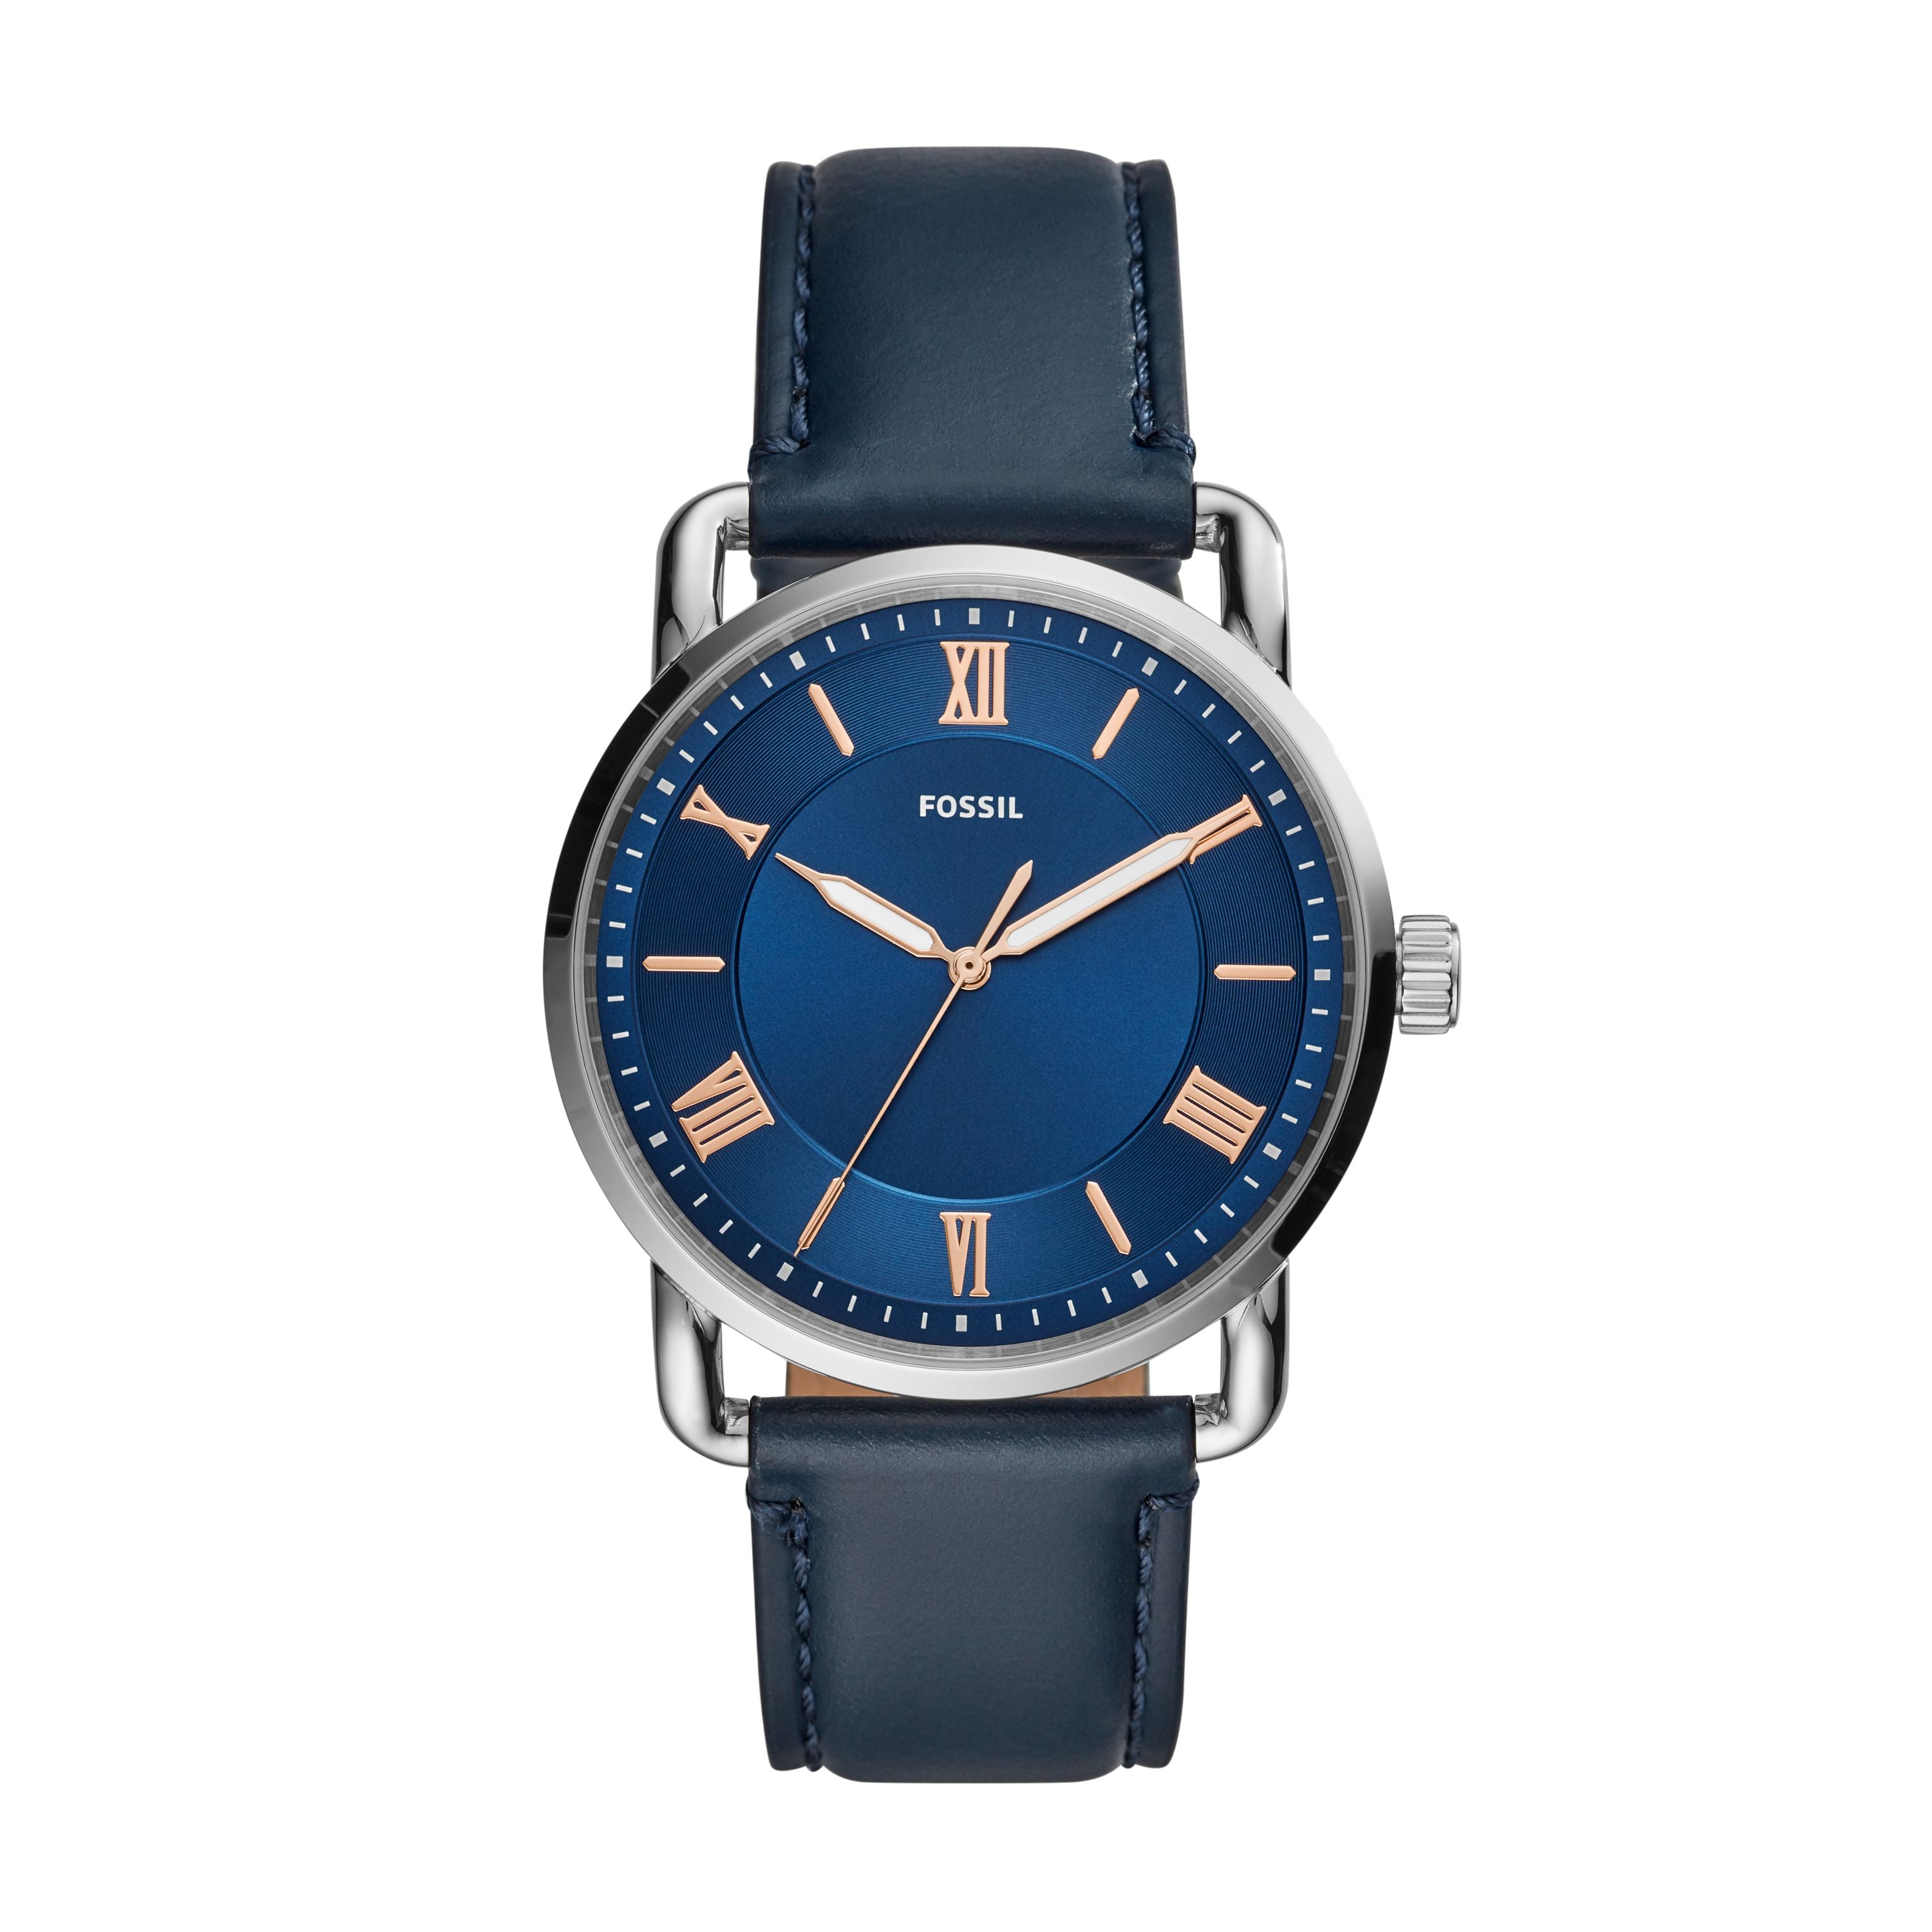 Fossil - Fossil Men's Copeland 42mm Three-Hand Navy Leather Watch ...